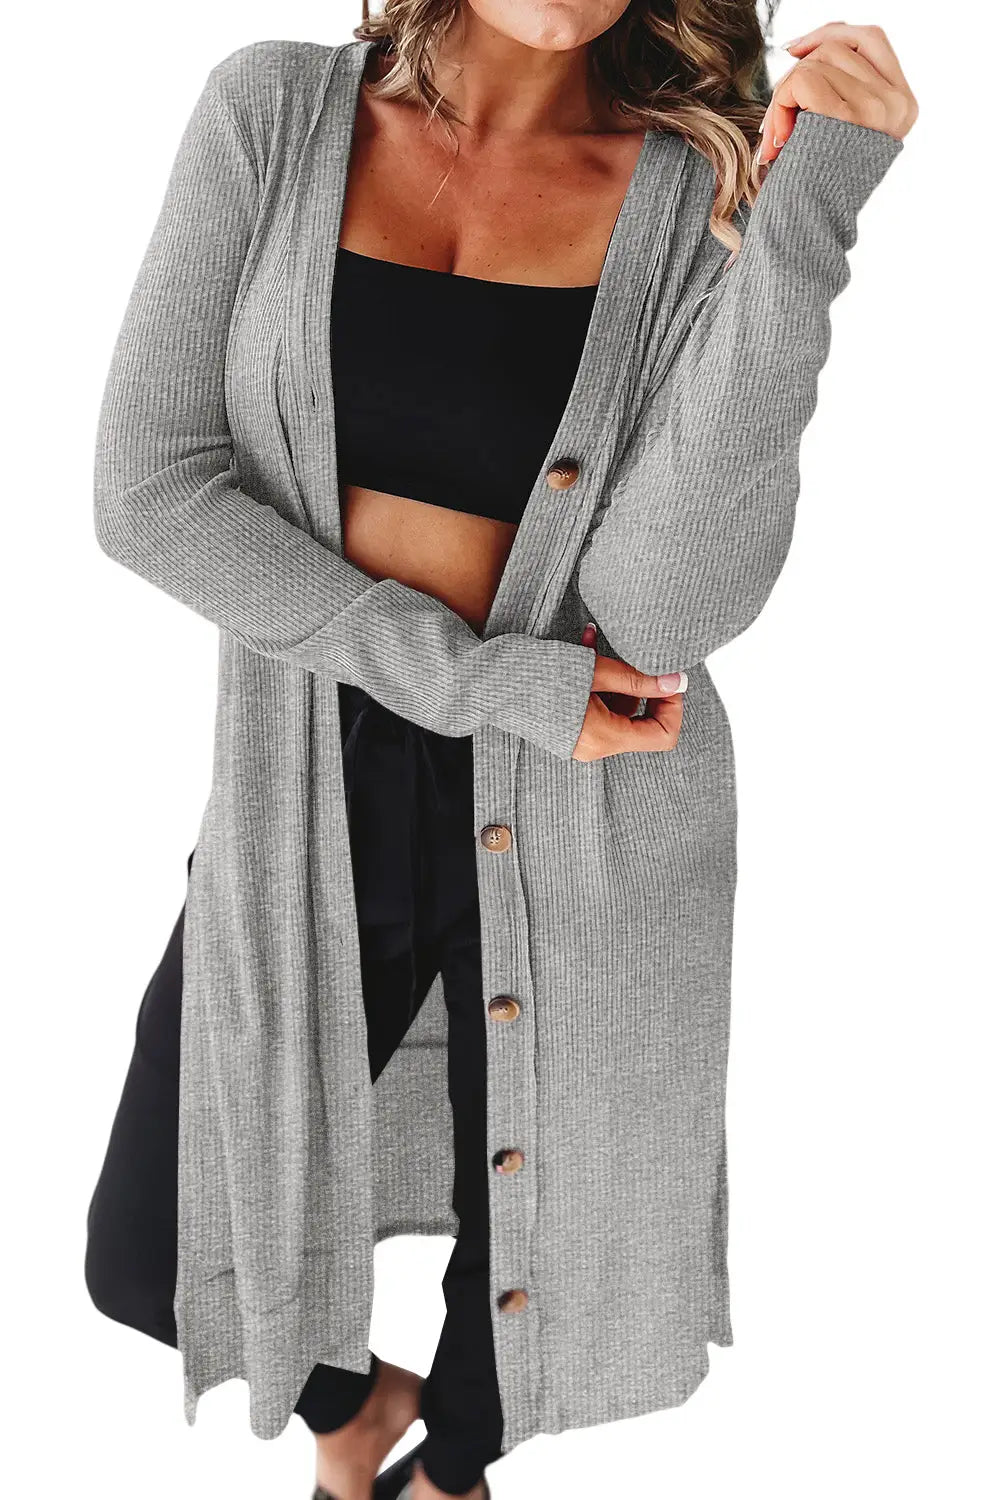 Gray ribbed button-up split duster cardigan - sweaters & cardigans